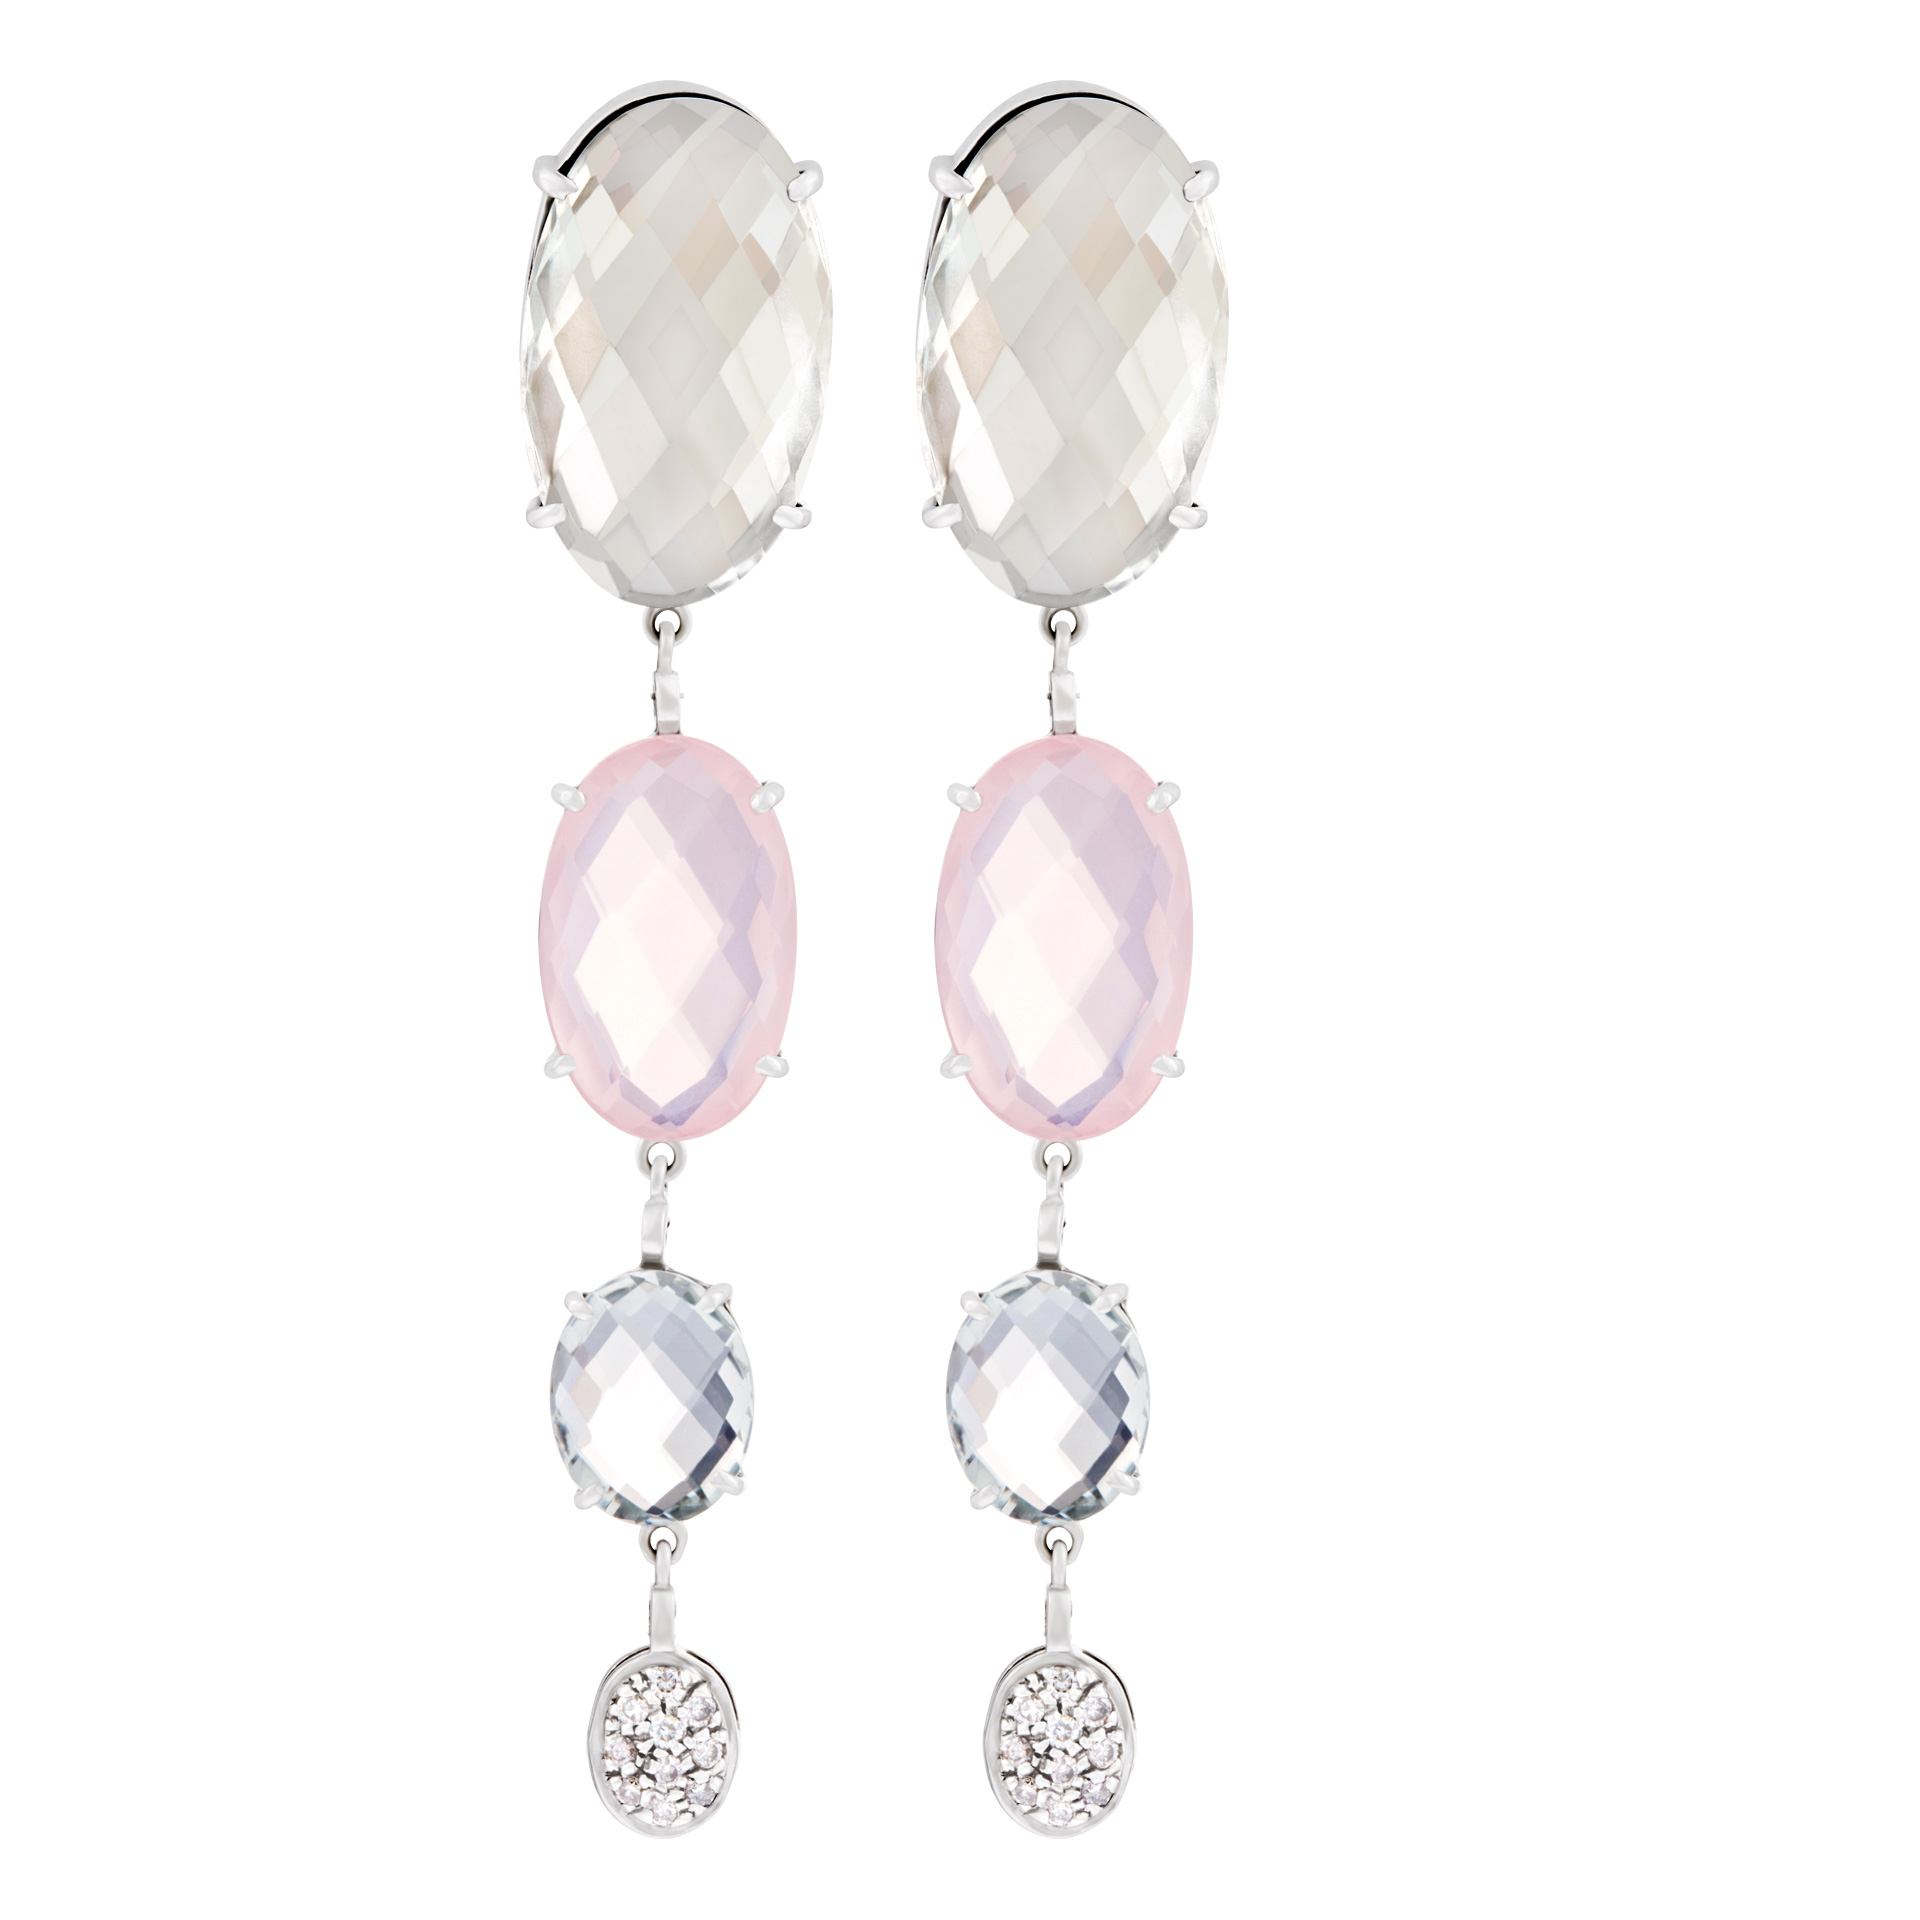  Faceted topaz, pink and smoky quartz dangling earrings with diamond accents